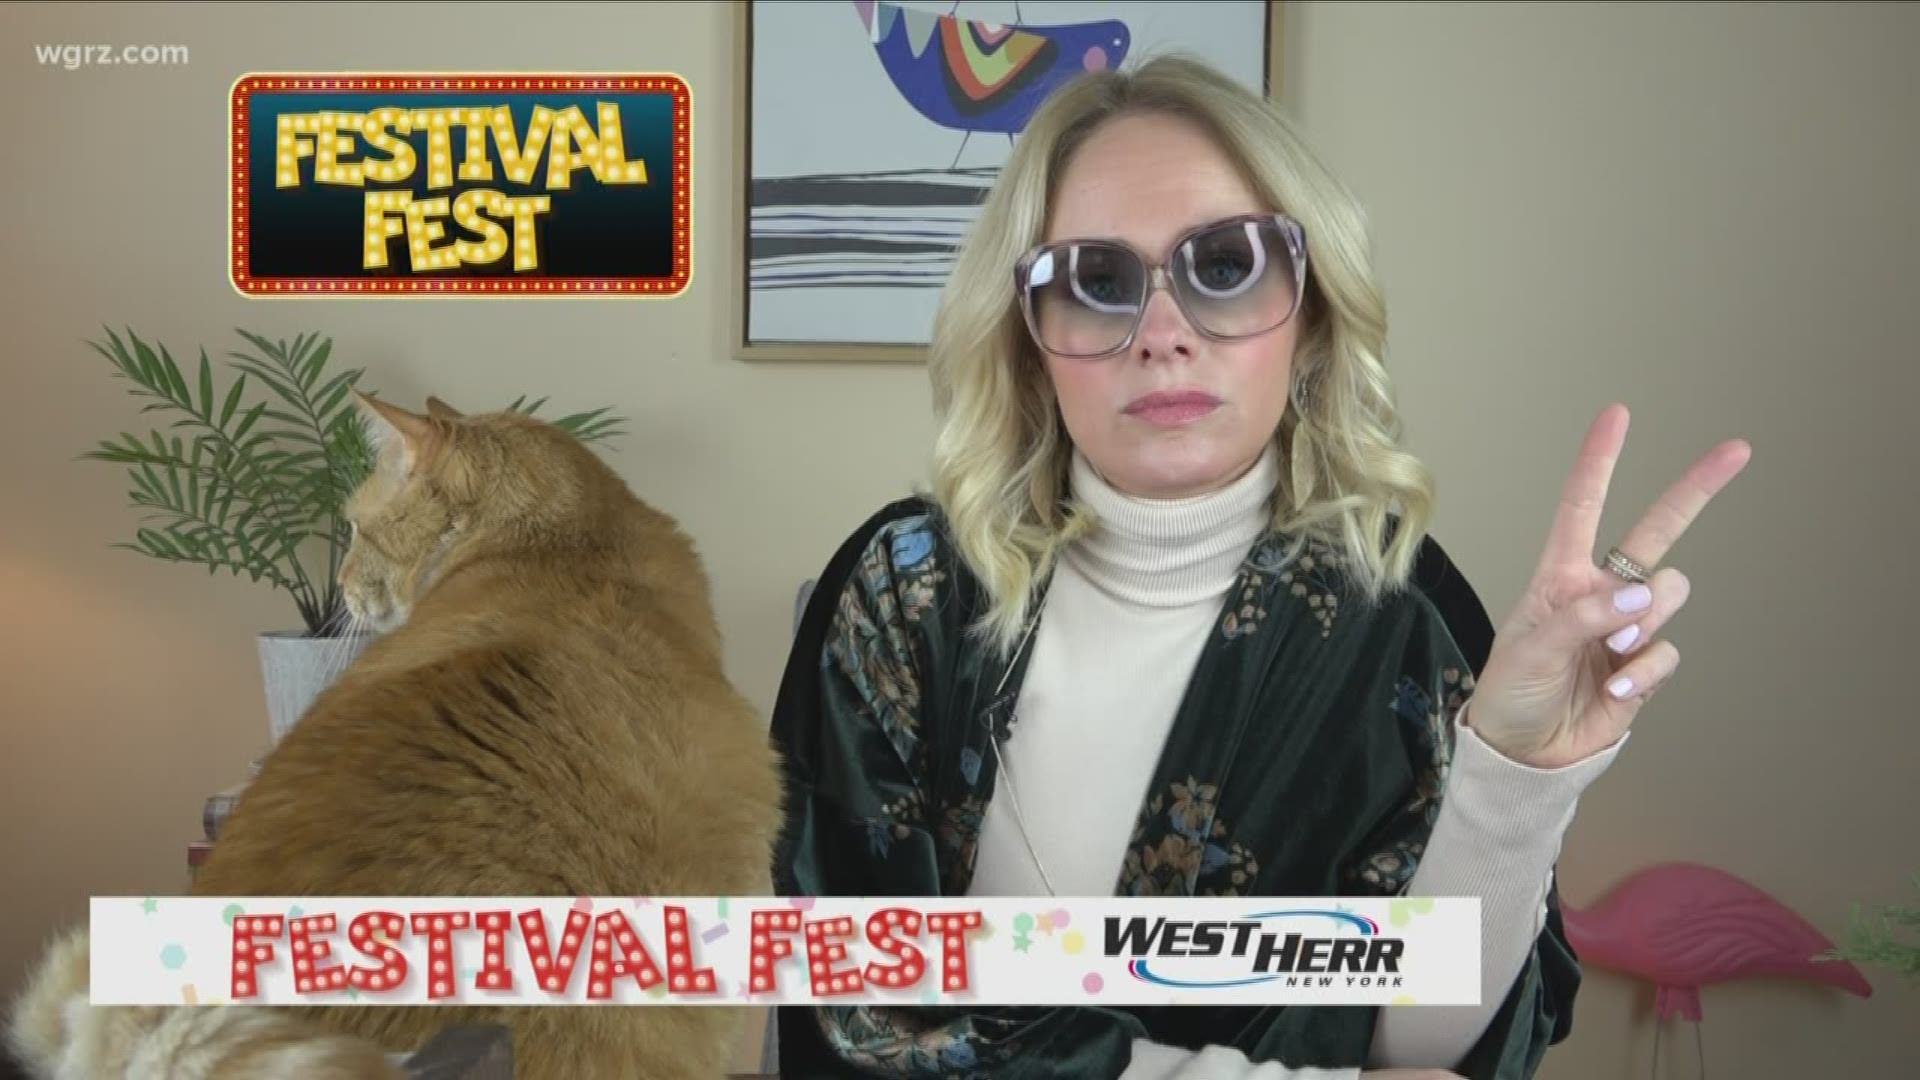 This is Festival Fest. It is the thing I do where I talk about things to do in WNY